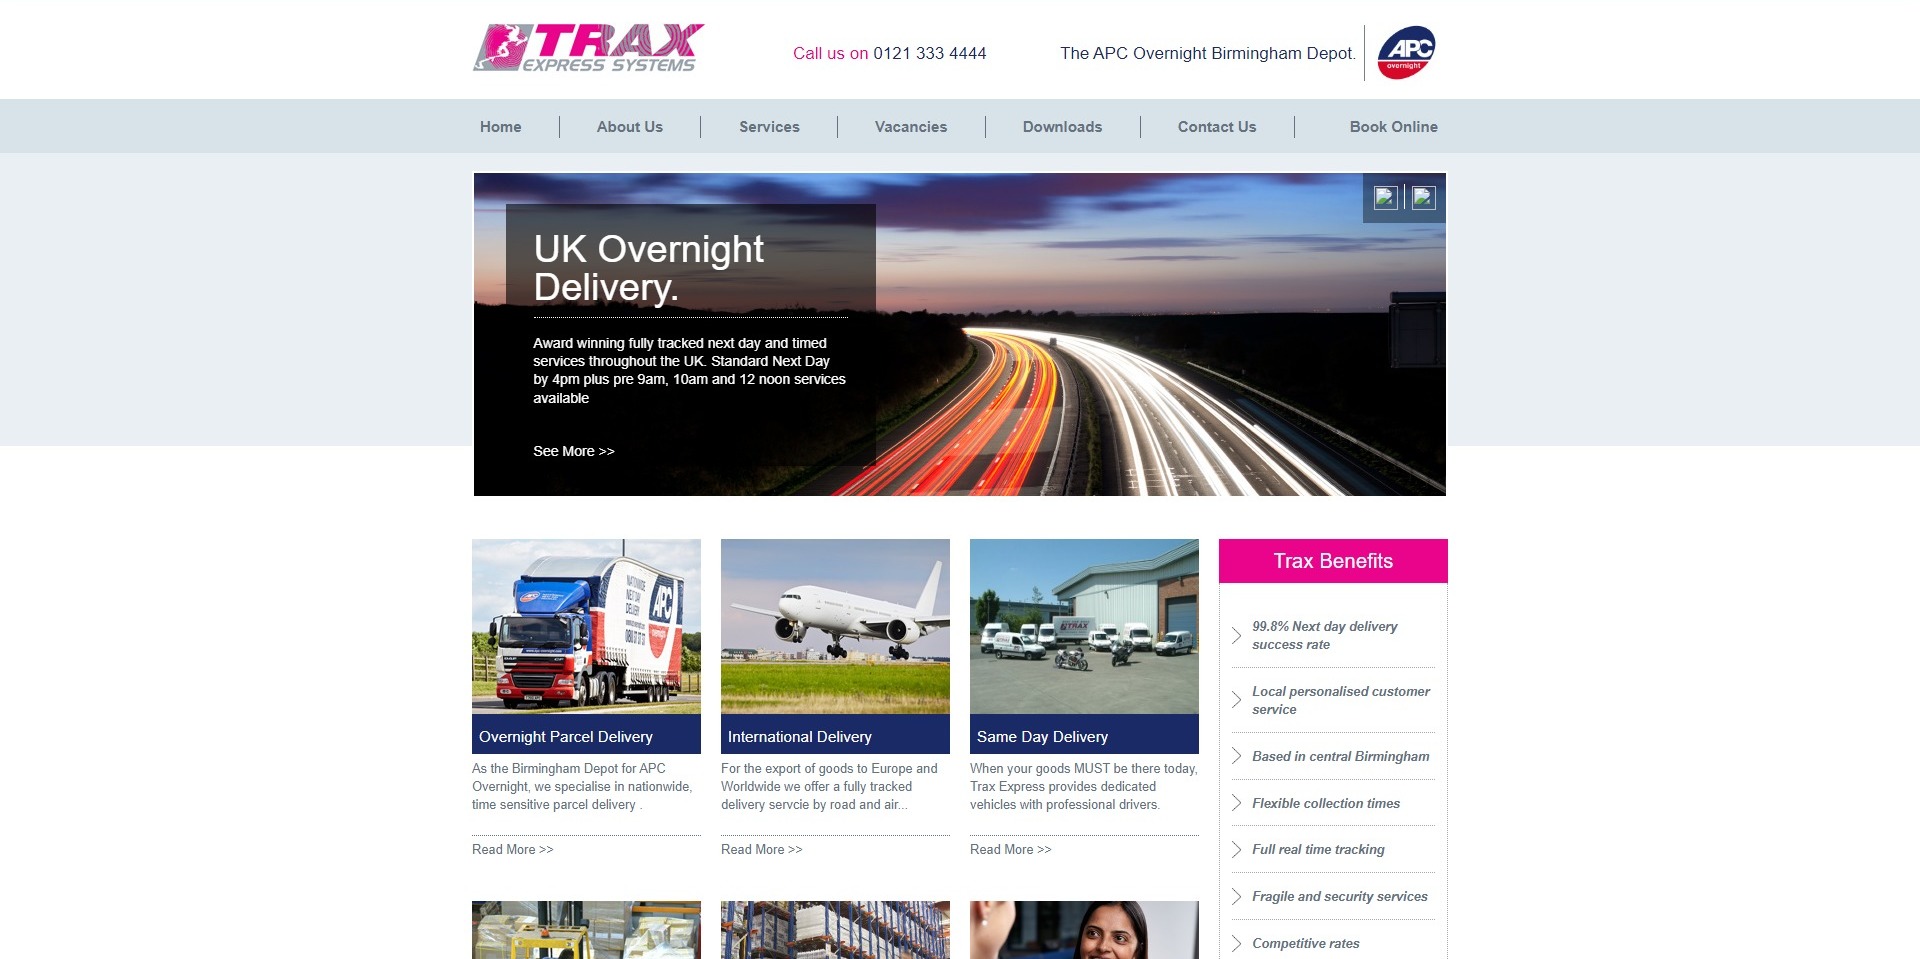 The previous Trax Express Systems website design